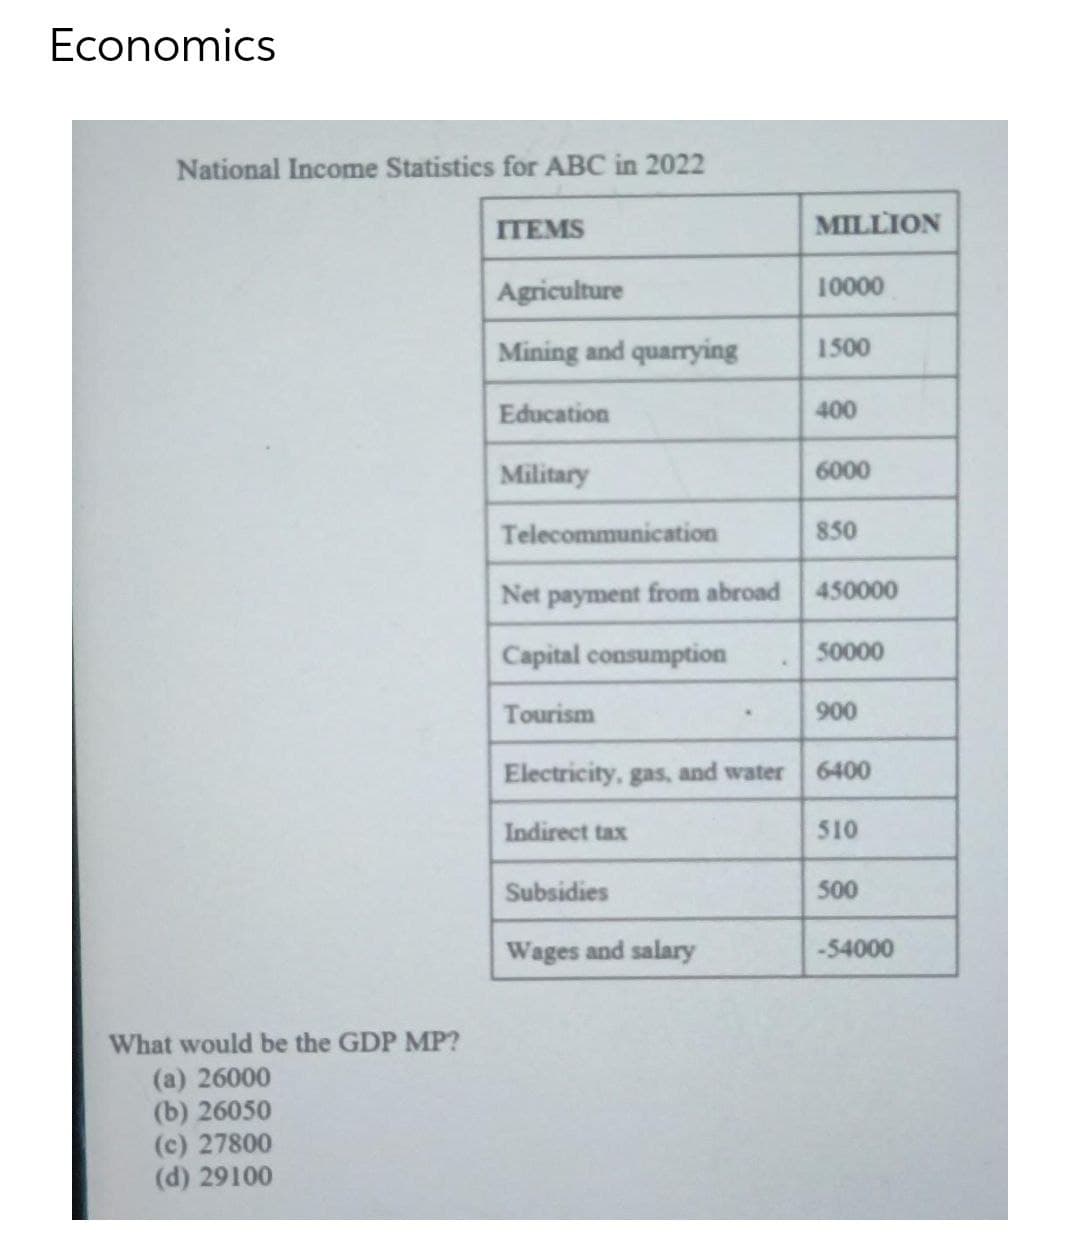 Economics
National Income Statistics for ABC in 2022
ITEMS
MILLION
Agriculture
10000
Mining and quarrying
1500
Education
400
Military
6000
Telecommunication
850
Net payment from abroad 450000
Capital consumption
50000
Tourism
900
Electricity, gas, and water
6400
Indirect tax
510
Subsidies
500
Wages and salary
-54000
What would be the GDP MP?
(a) 26000
(b) 26050
(c) 27800
(d) 29100
